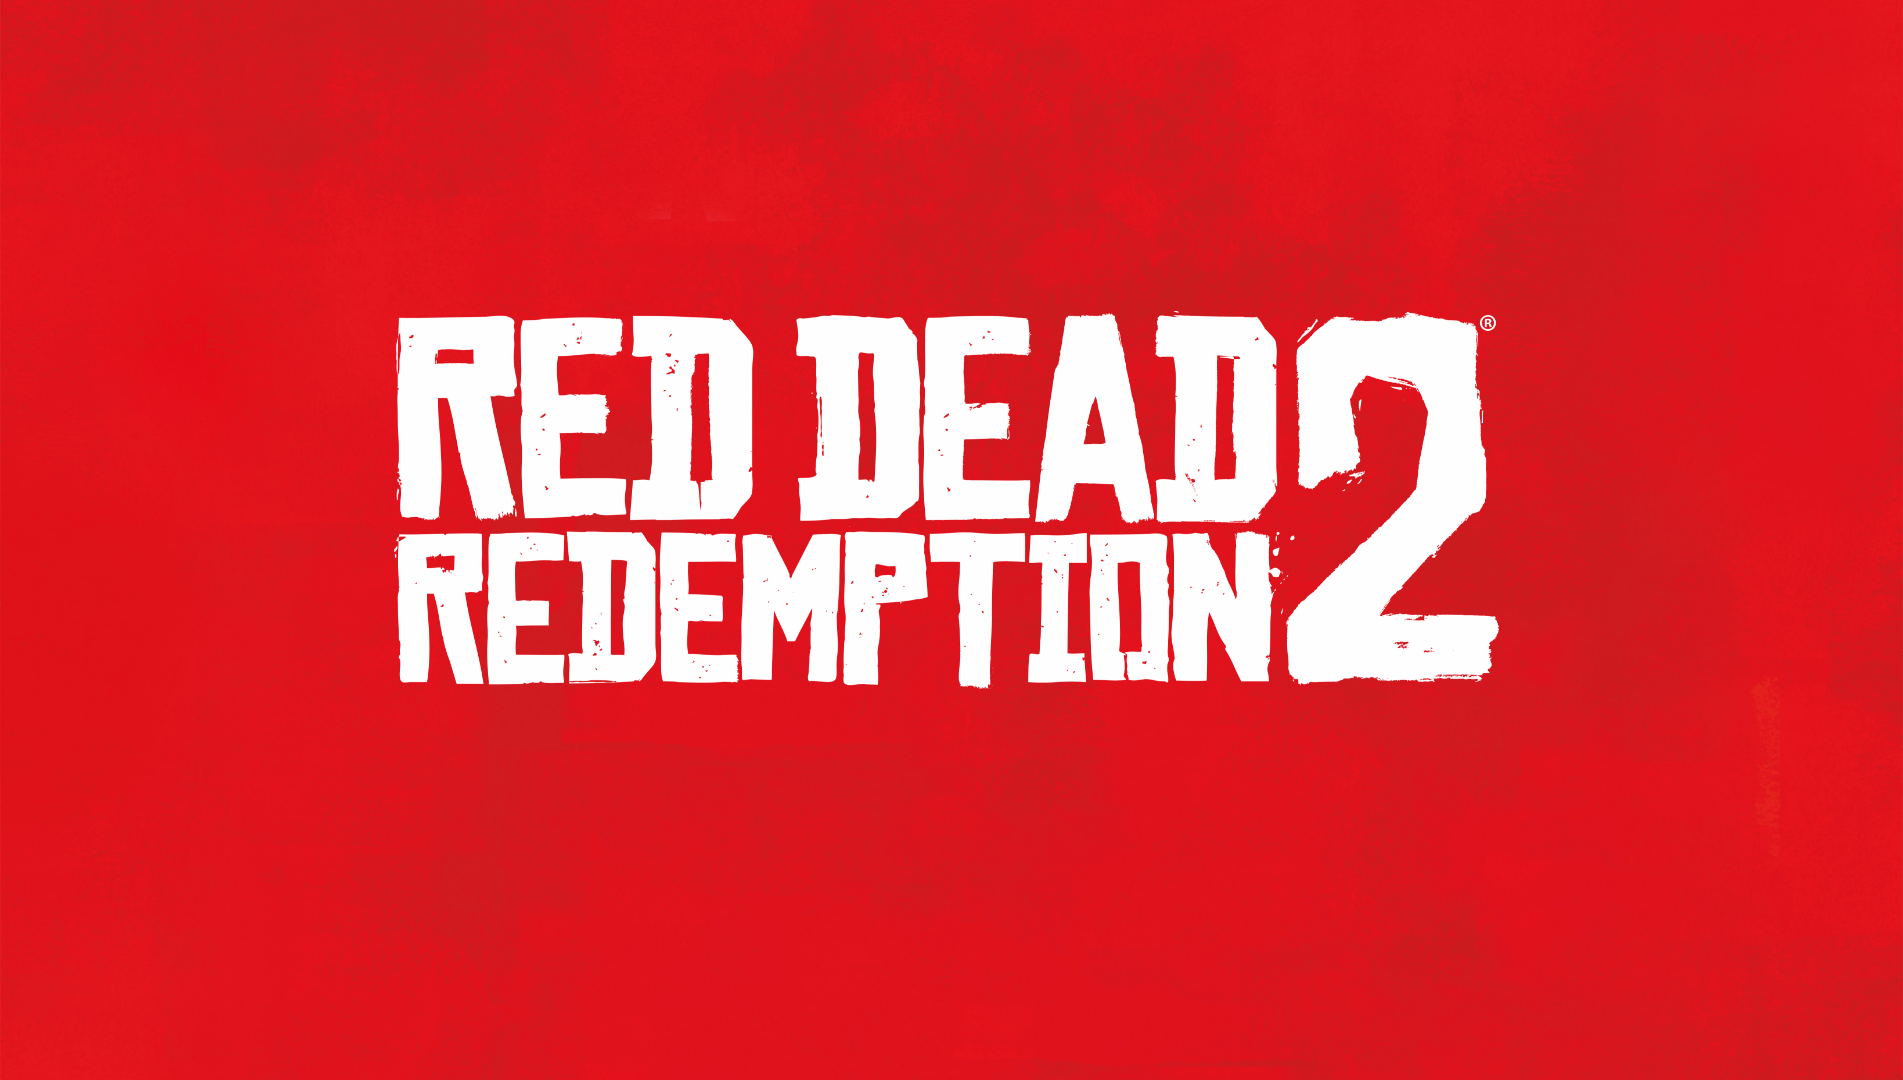 Red Dead Redemption 2 Wallpaper Image Photo Picture Background